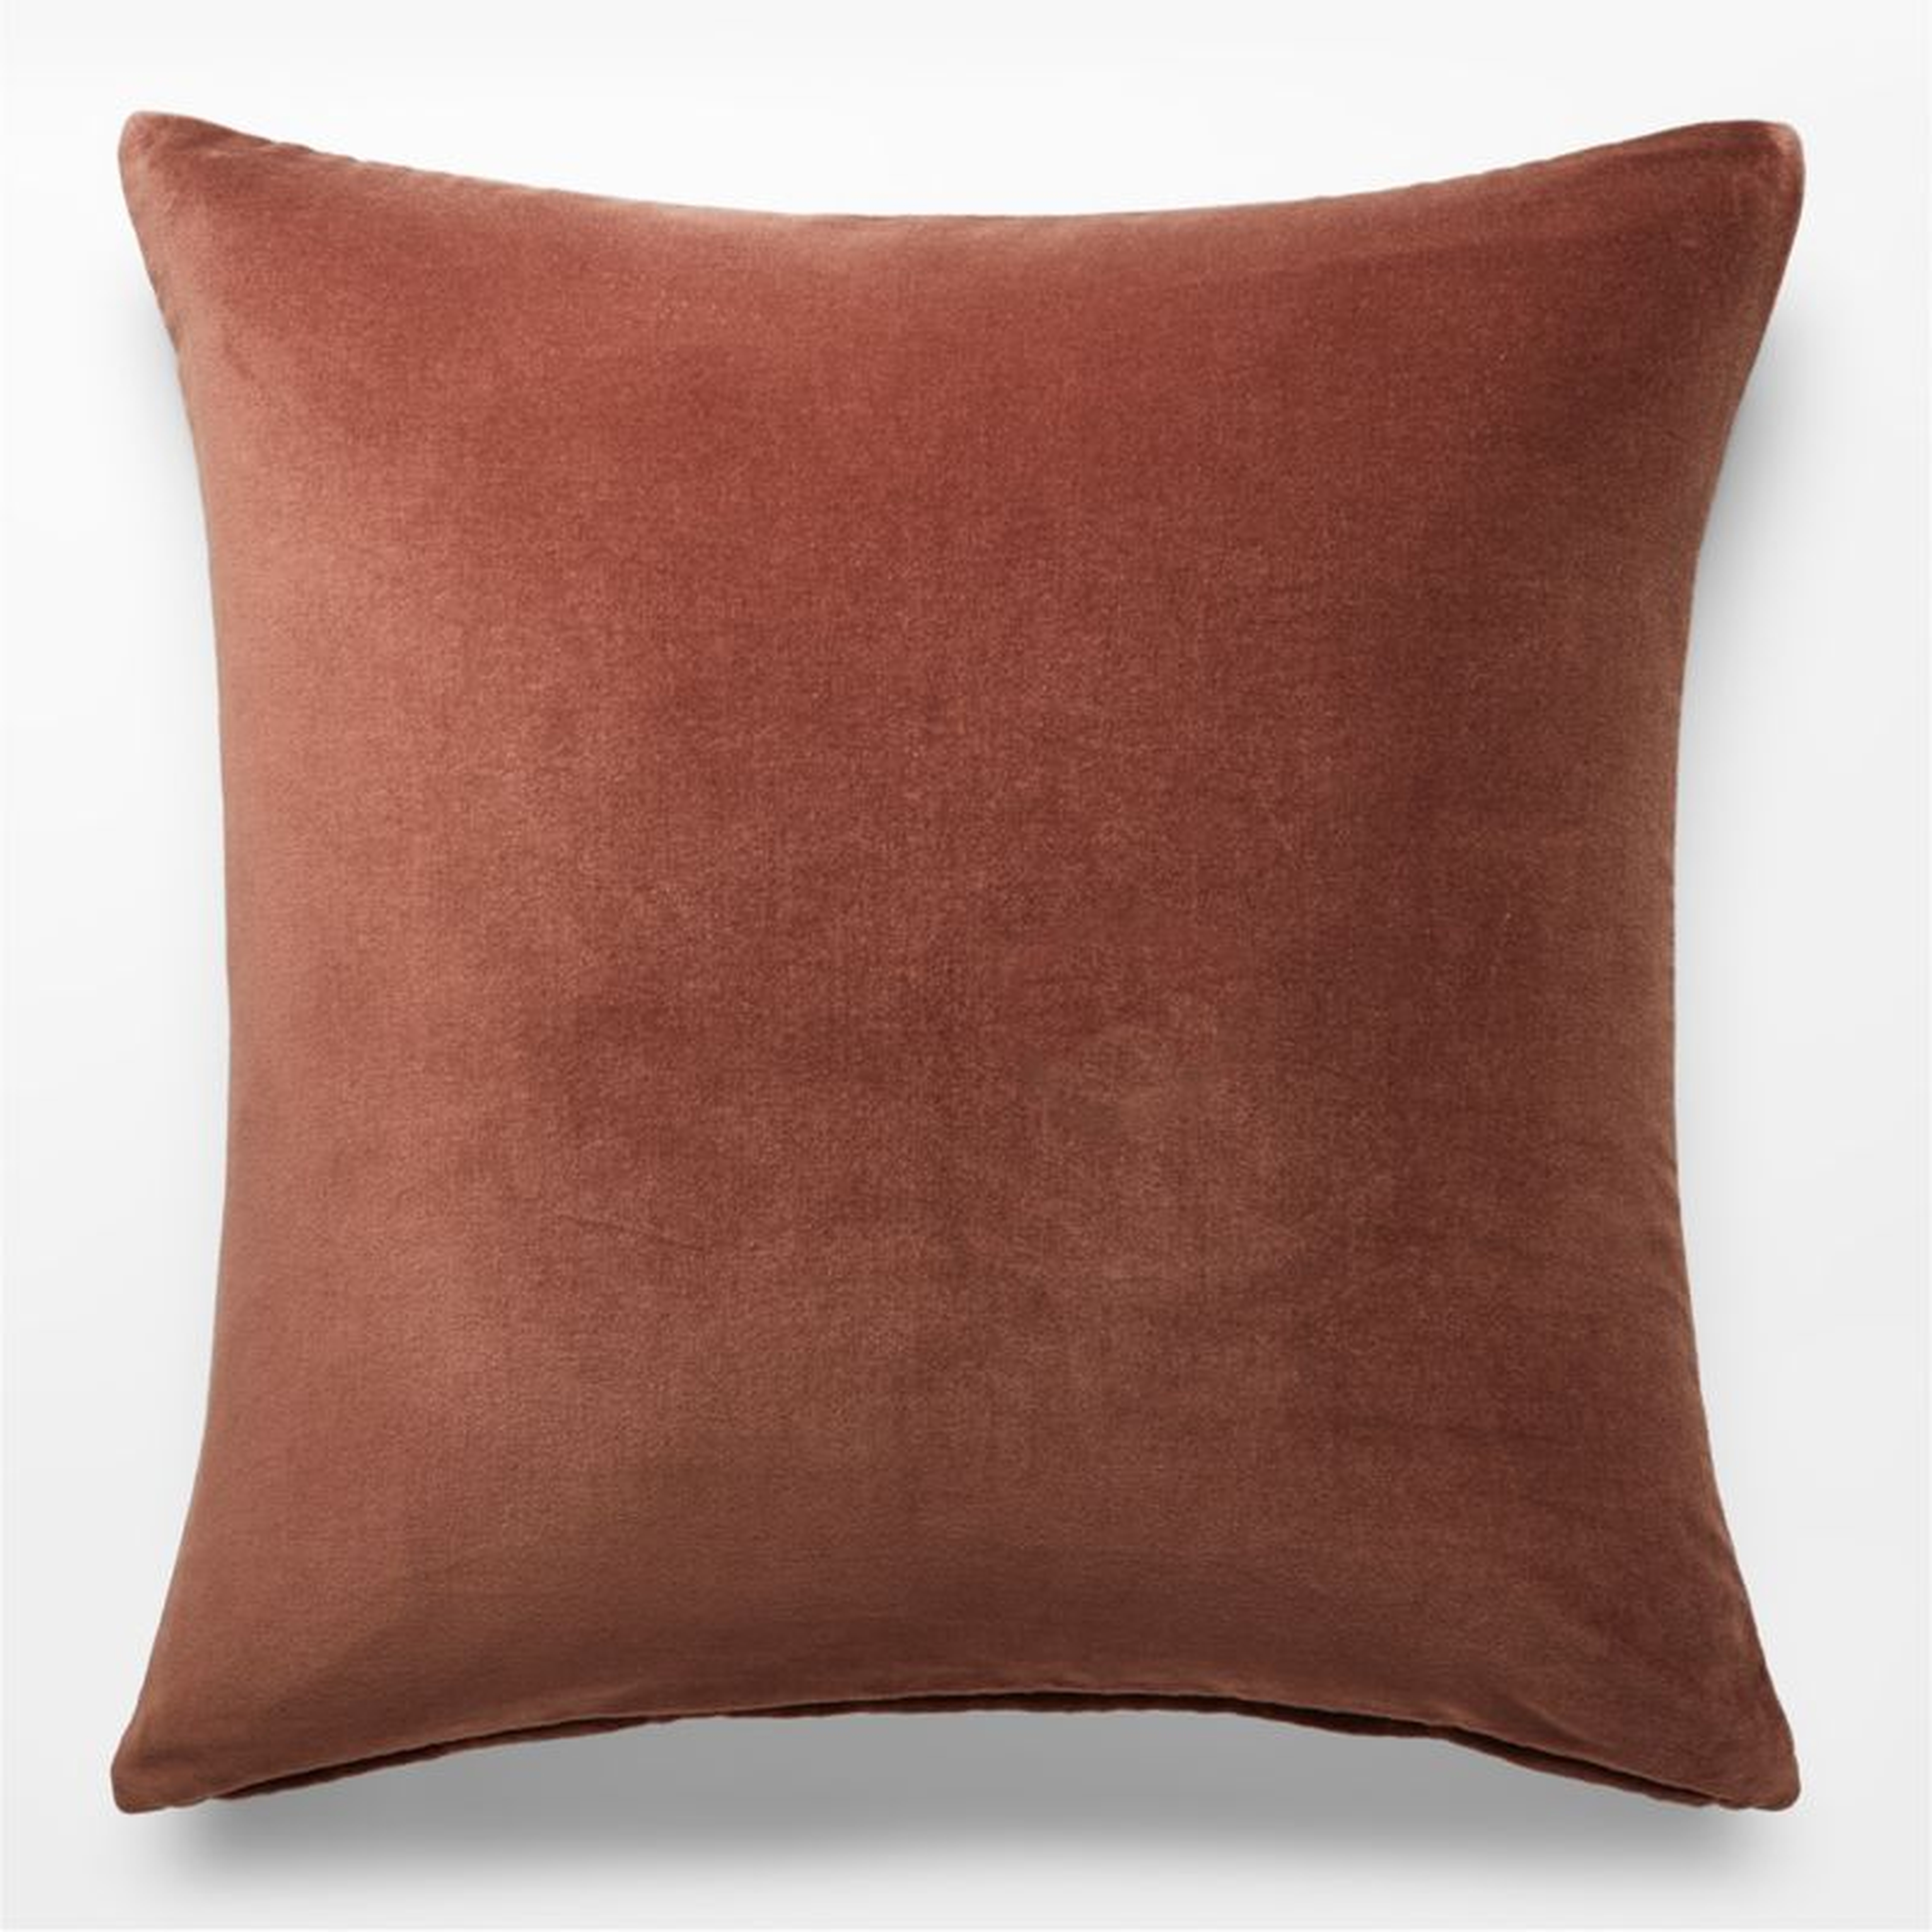 Leisure Rum Raisin Pillow with Feather-Down Insert, 23" x 23" - CB2